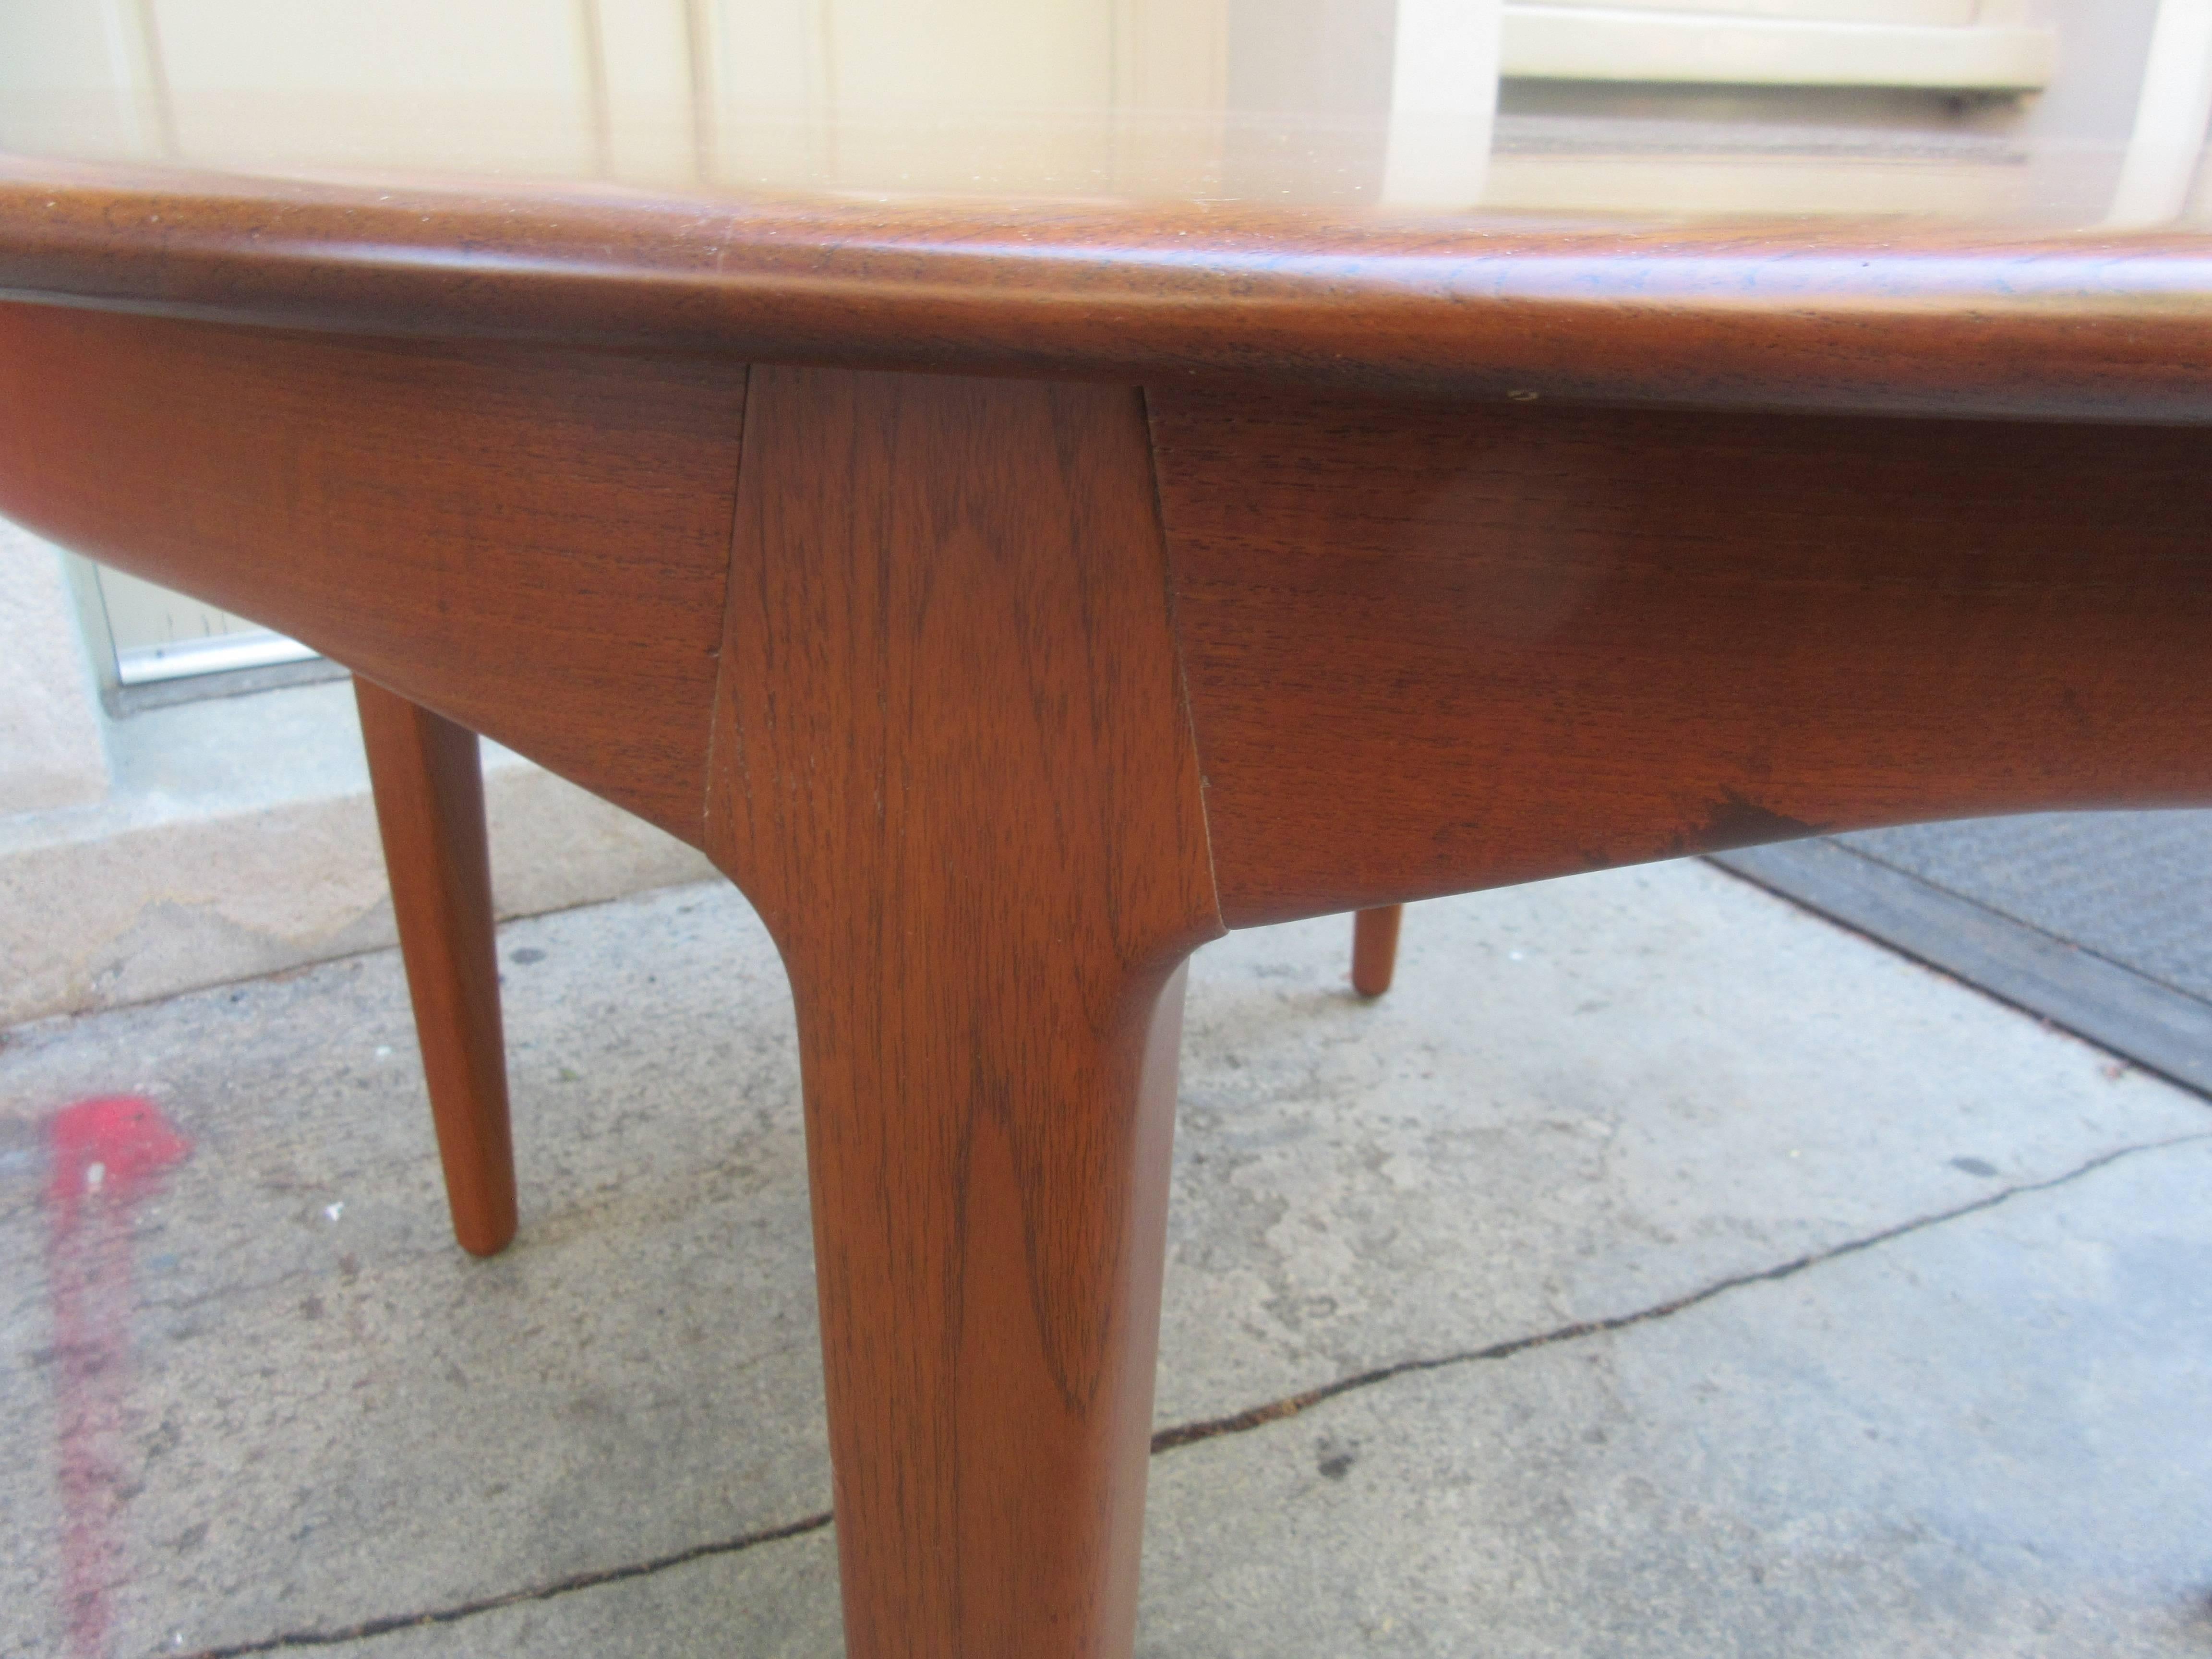 Beautiful newly refinished Henning Kjaernulf teak dining table with an amazing complete skirt, even when leaves are put in place! Additional four leaves measuring 19 3/4